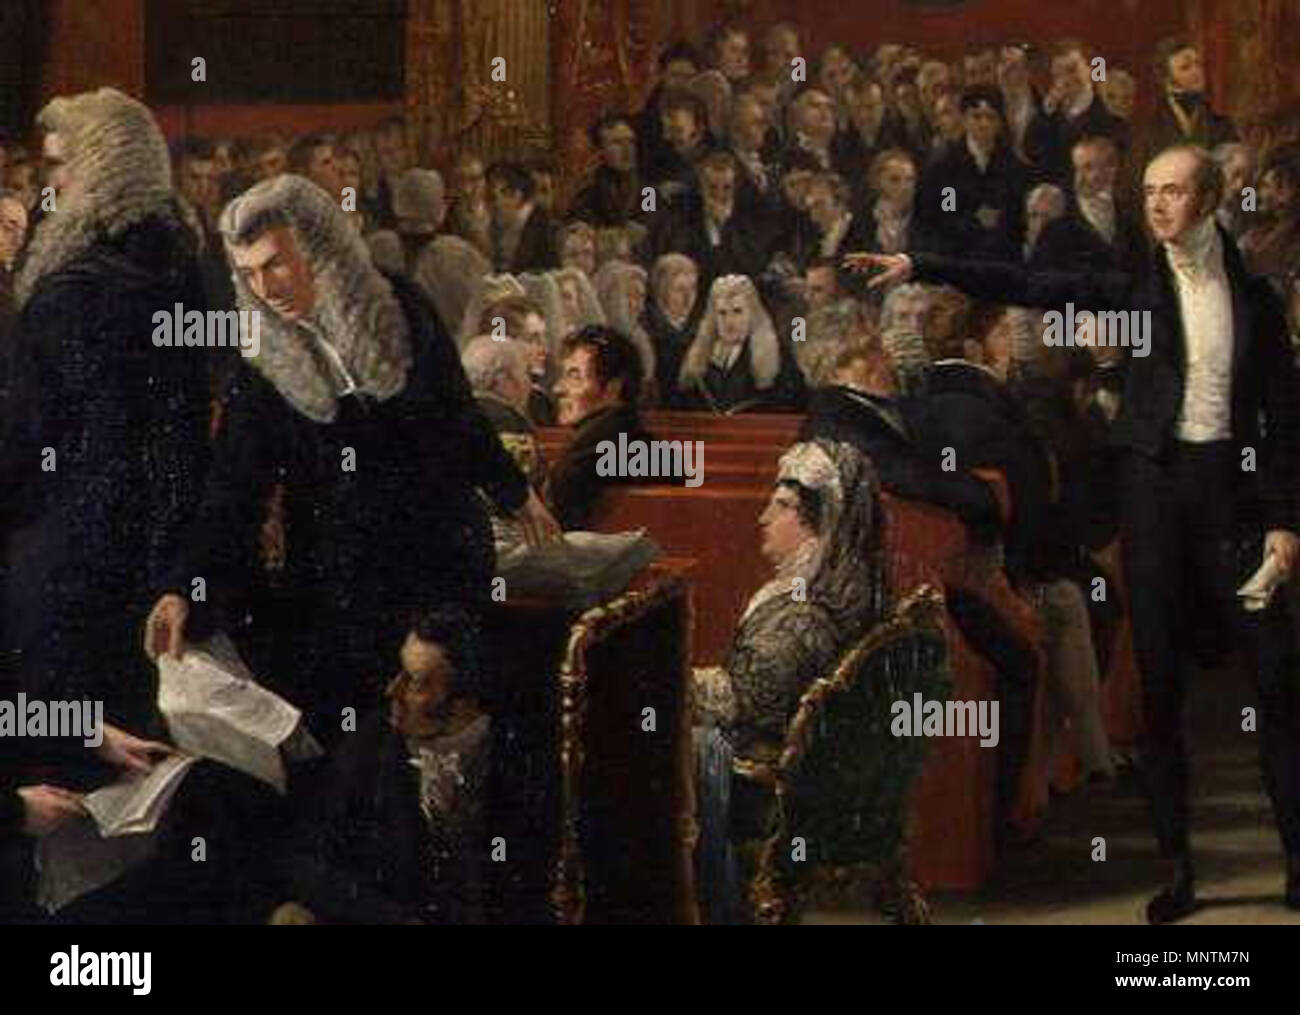 . English: (detail from) The Trial of Queen Caroline 1820 by Sir George Hayter - left to right: Stephen Lushington (in wig with back to painter); Henry Brougham (in wig handing sheet of paper downwards); William Vizard, the Queen's solicitor (on floor beneath Brougham); Lord Lauderdale (sitting on bench with back to painter); Lord Chancellor Lord Eldon (seated in background facing front); Queen Caroline; Lord Grey (with extended arm); Lord Effingham (beneath Lord Grey's hand facing Grey). Note this is an extract from a much larger painting. March 1820.   George Hayter  (1792–1871)     Descript Stock Photo